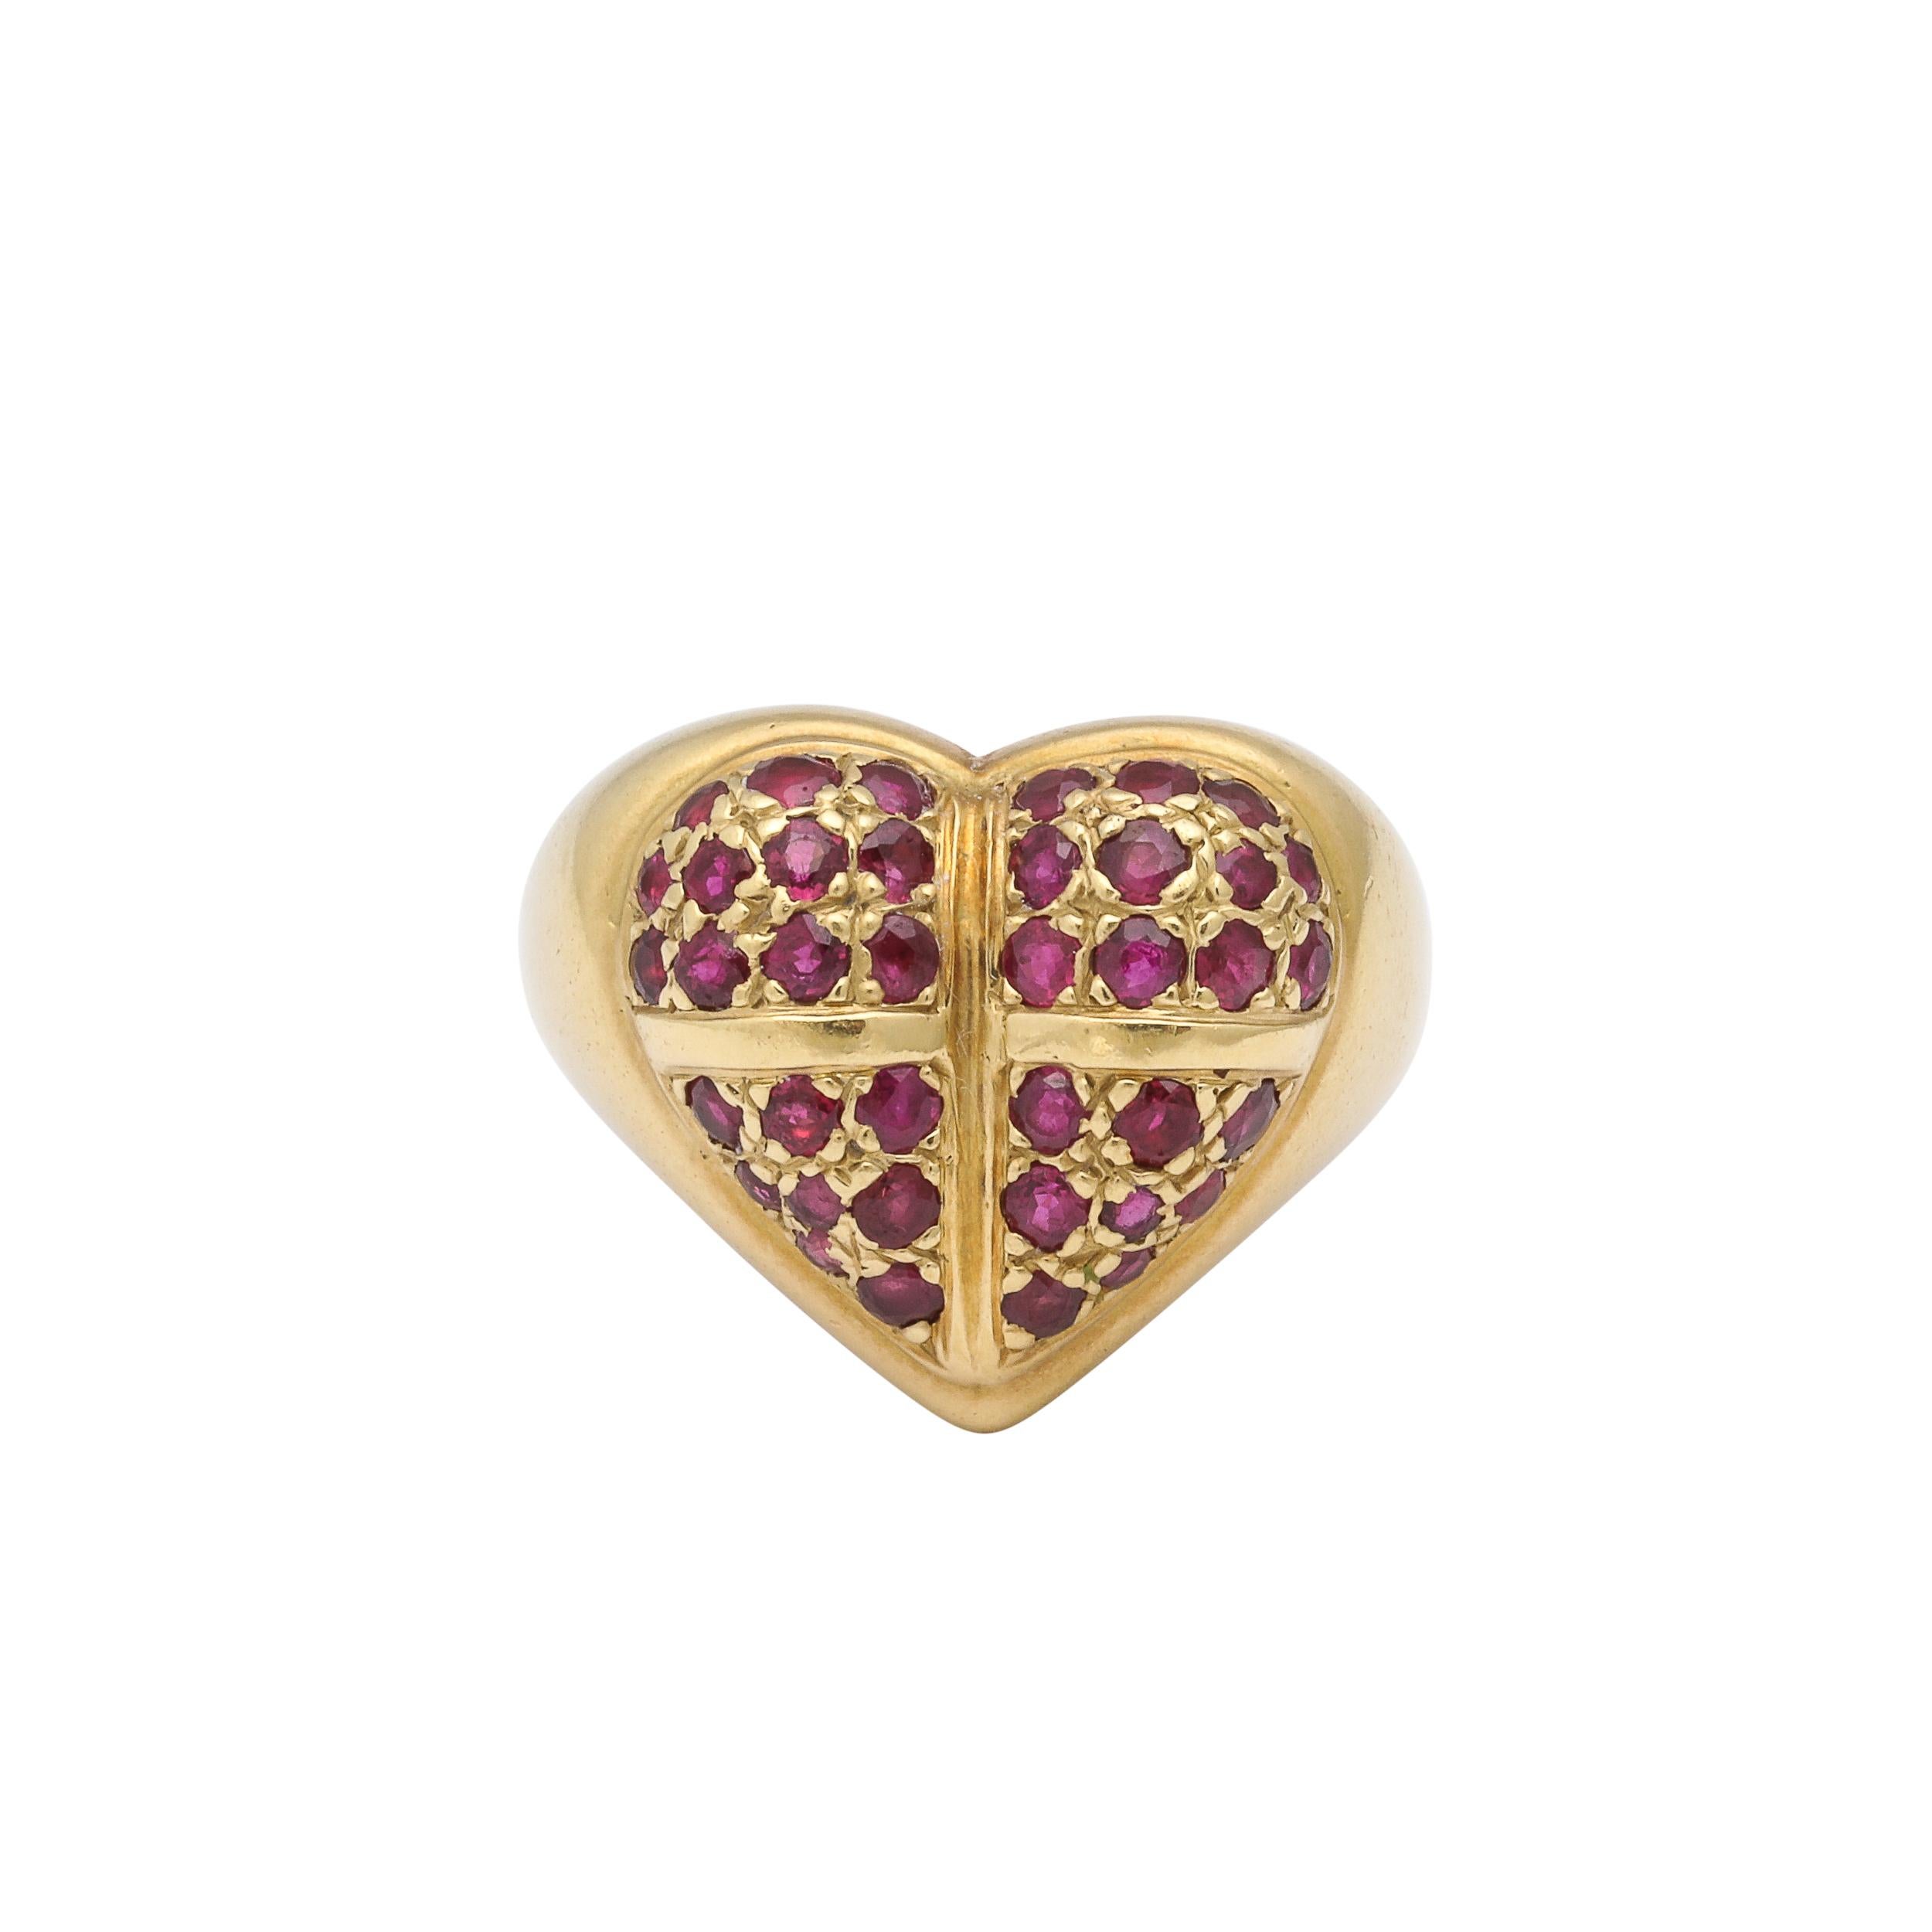 This beautiful Modernist 18 Karat Gold and Ruby  Heart Ring is fabricated and signed Kisselstein Cord and originates from the United States, Circa 1990. Features a beautiful heart shaped profile rendered in 18Karat Gold and encrusted in rubies,